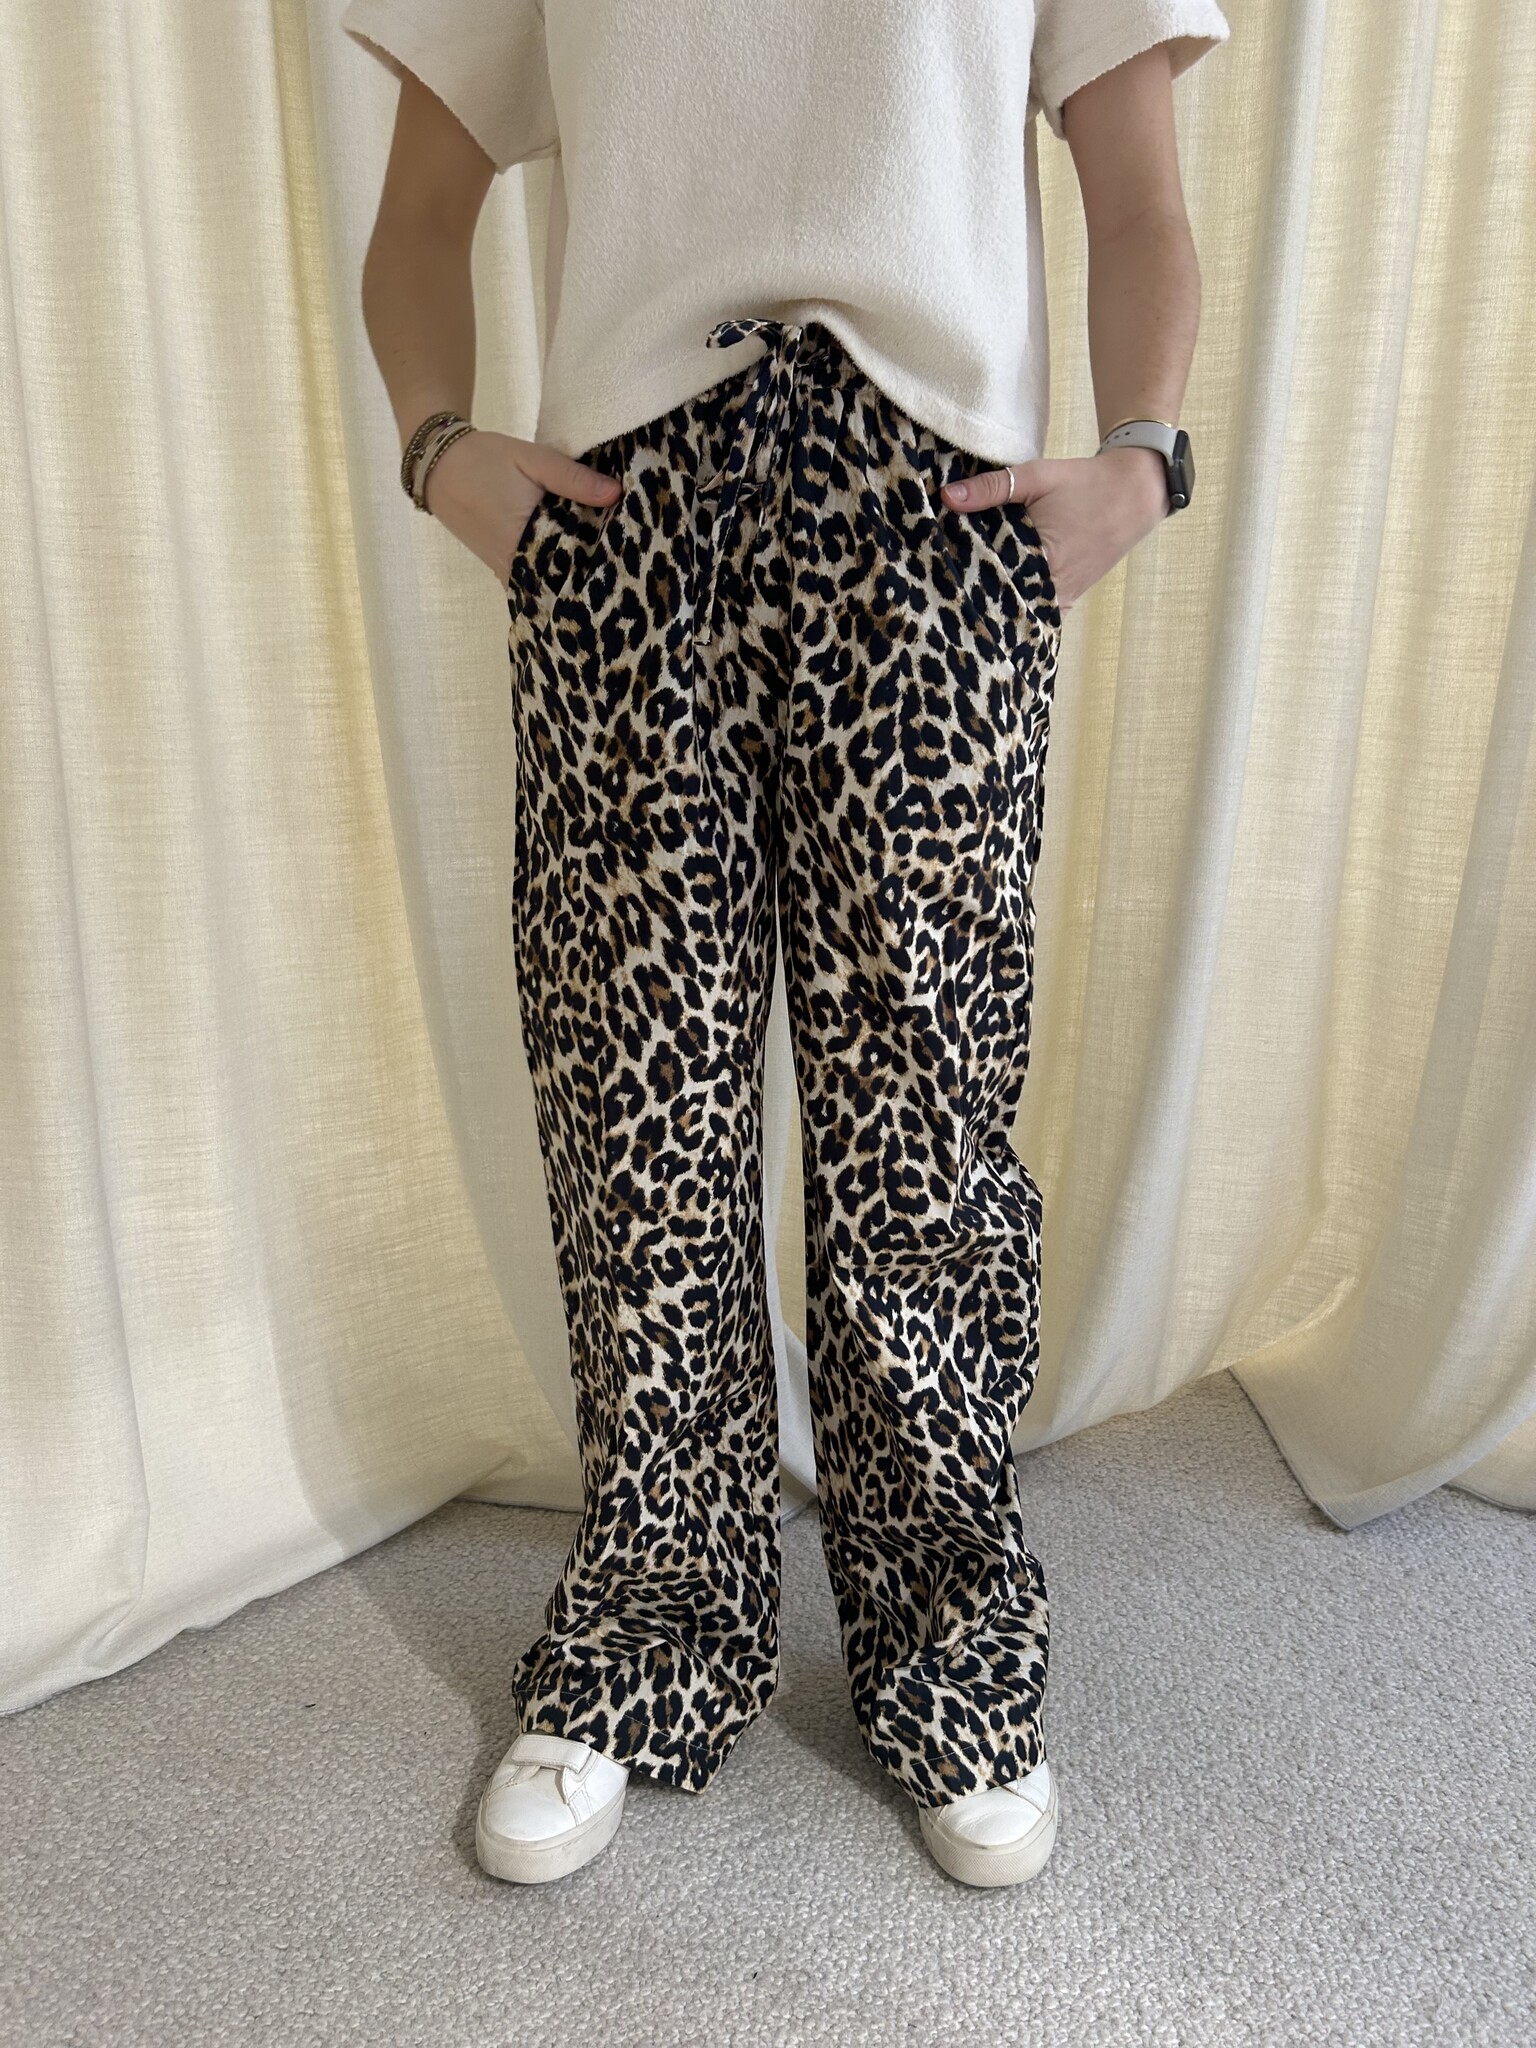 Leopard Pants - Chic on the Cheap | Connecticut based style blogger on a  budget, by Lydia Abate